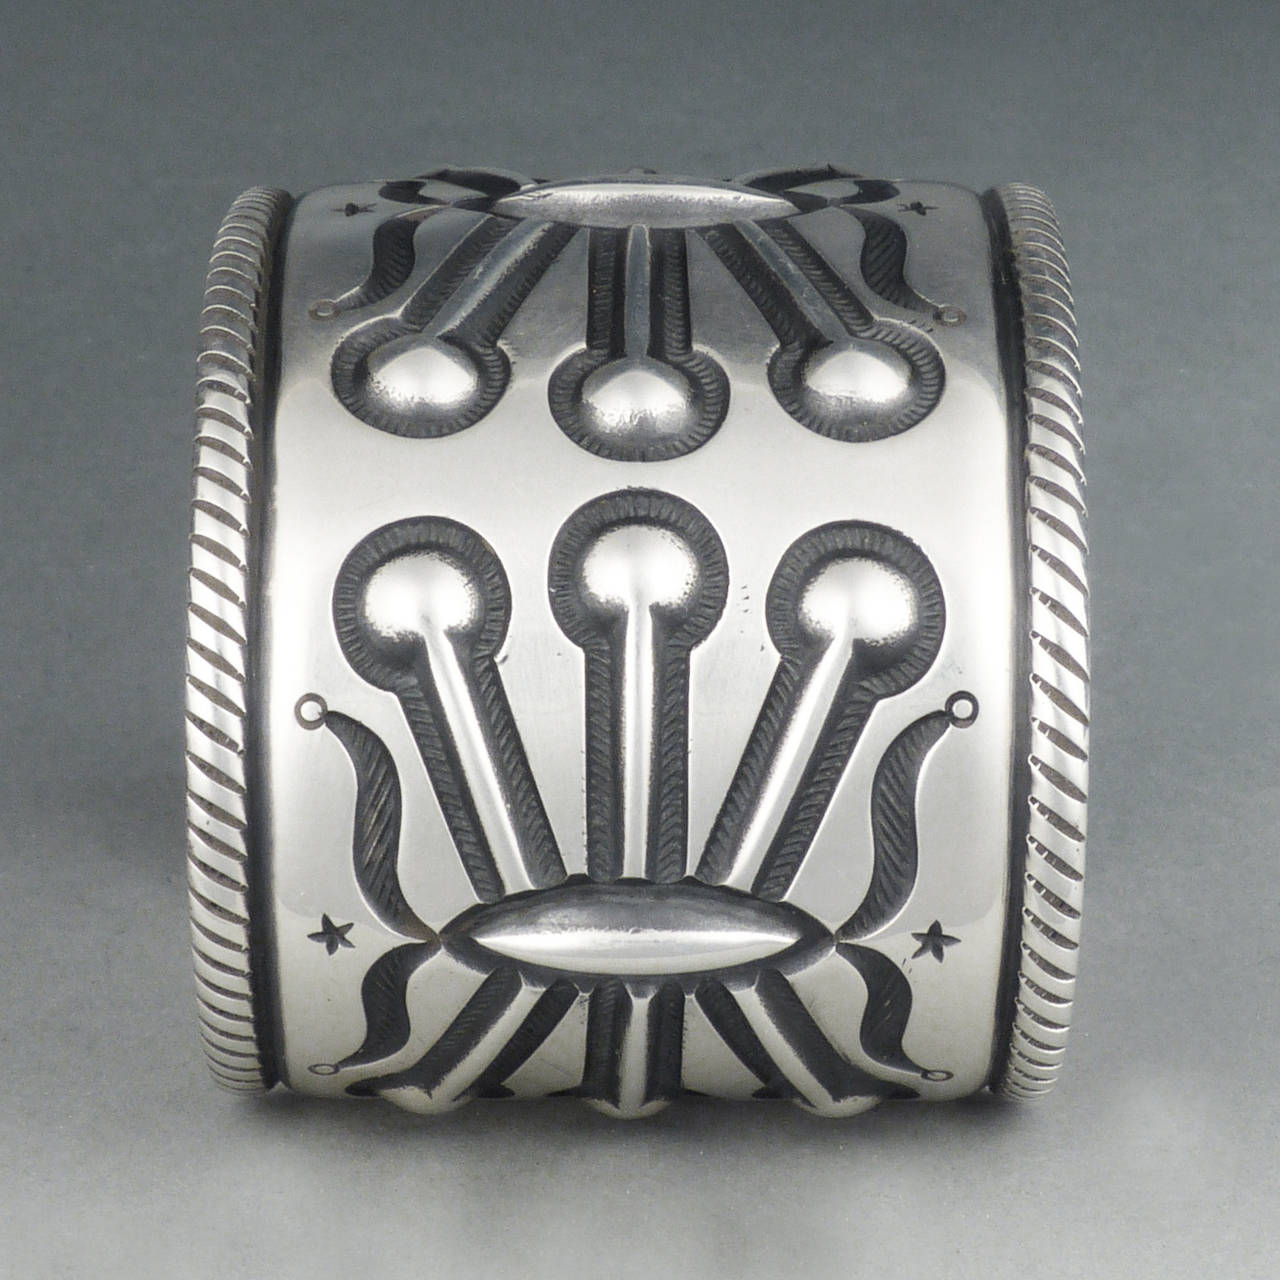 An exquisite piece of jewelry by the one of the most widely sought-after Navajo silversmiths working today.  Exquisitely wrought from heavy gauge sterling silver, the central motif represents a water bug, a sacred creature in Navajo tradition due to